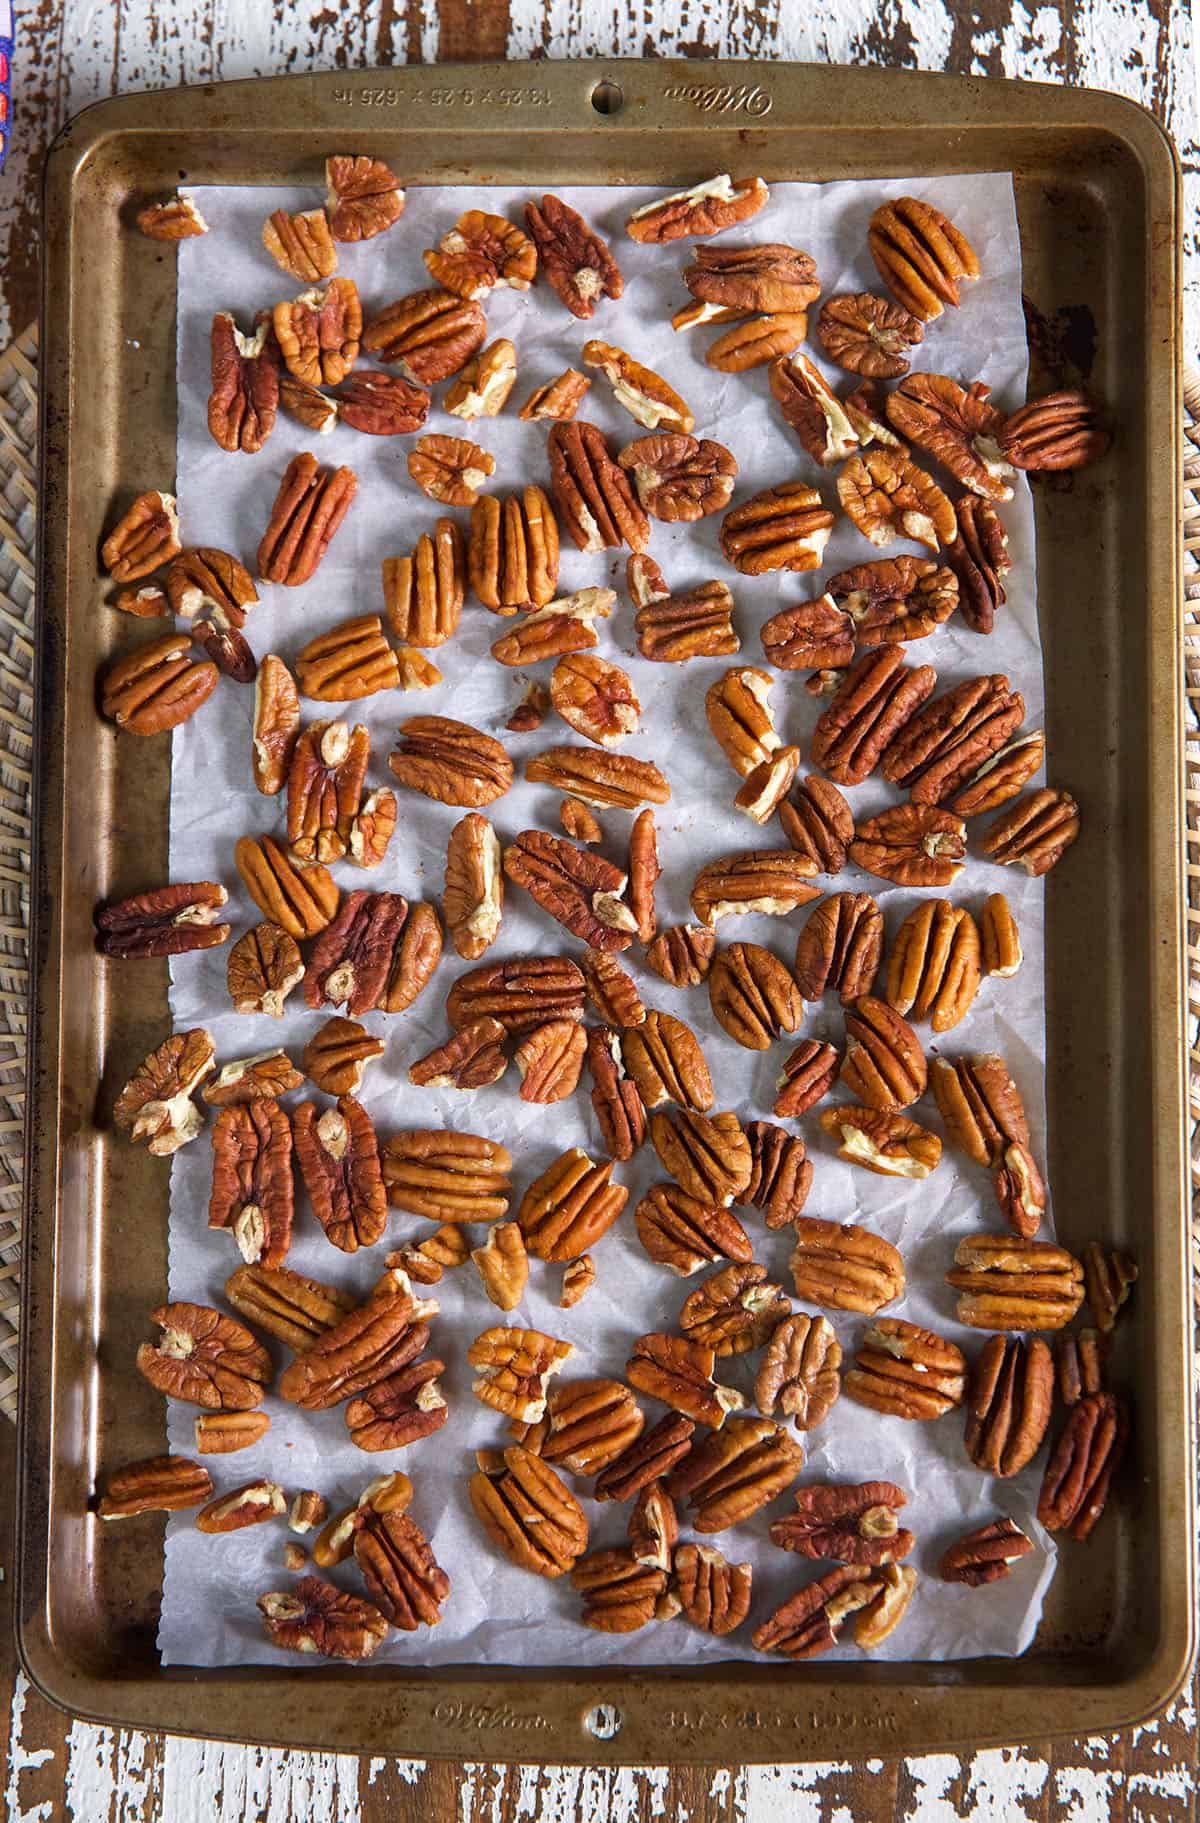 Pecans are spread out on a lined baking sheet.